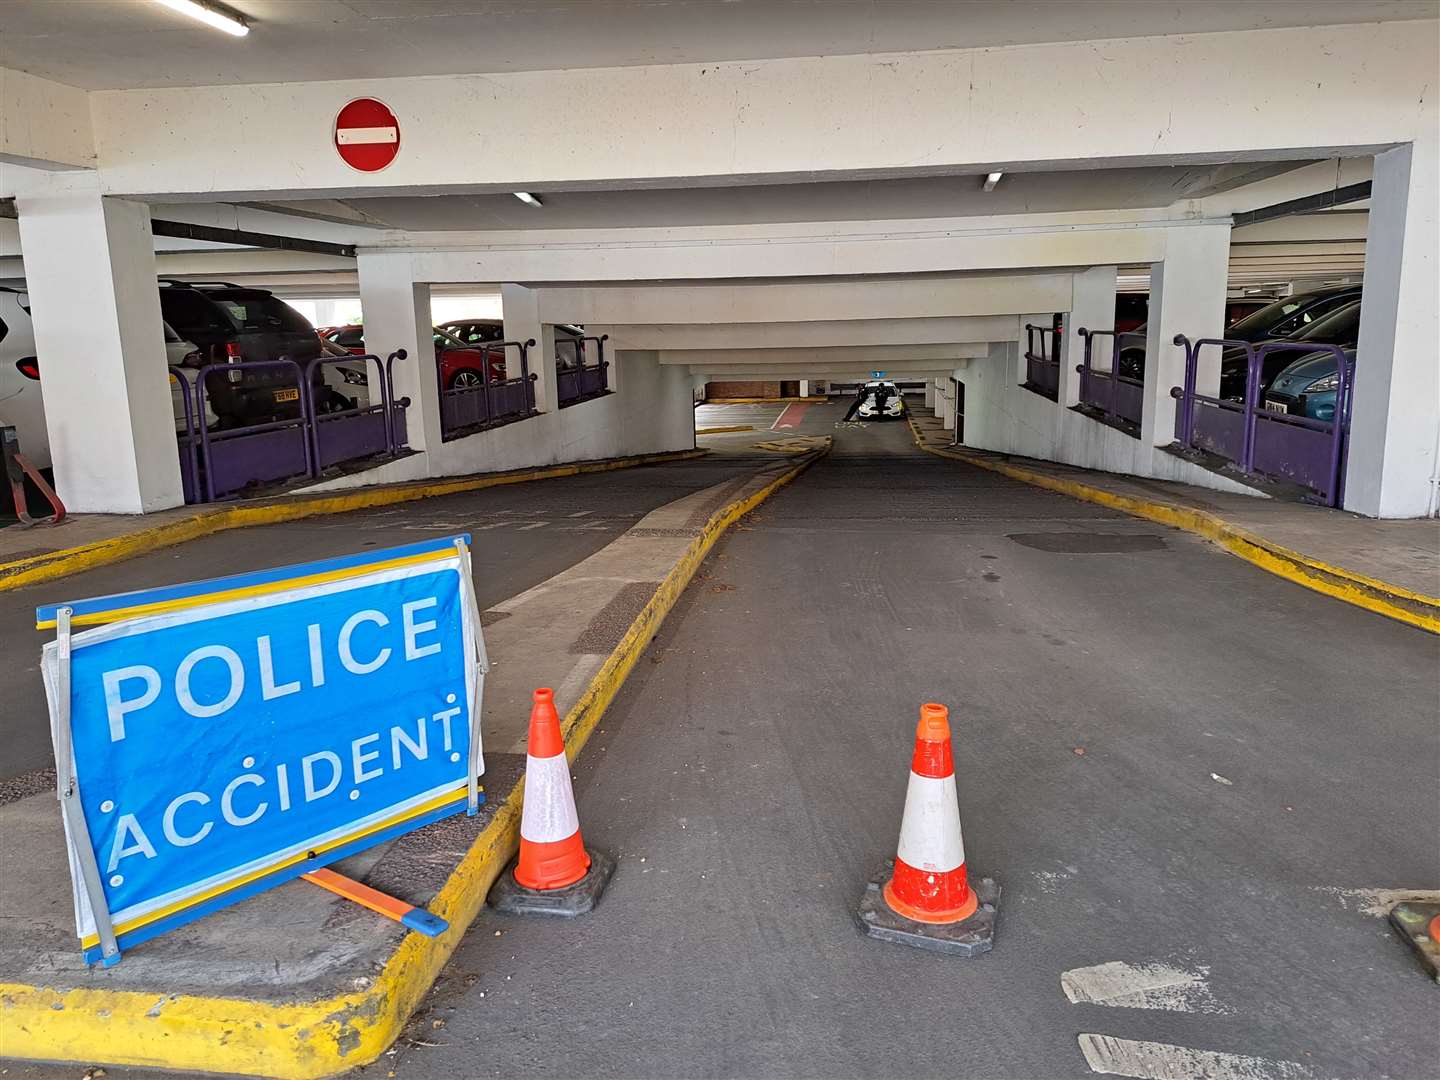 Police were called to Castle Street multi-storey car park on Monday